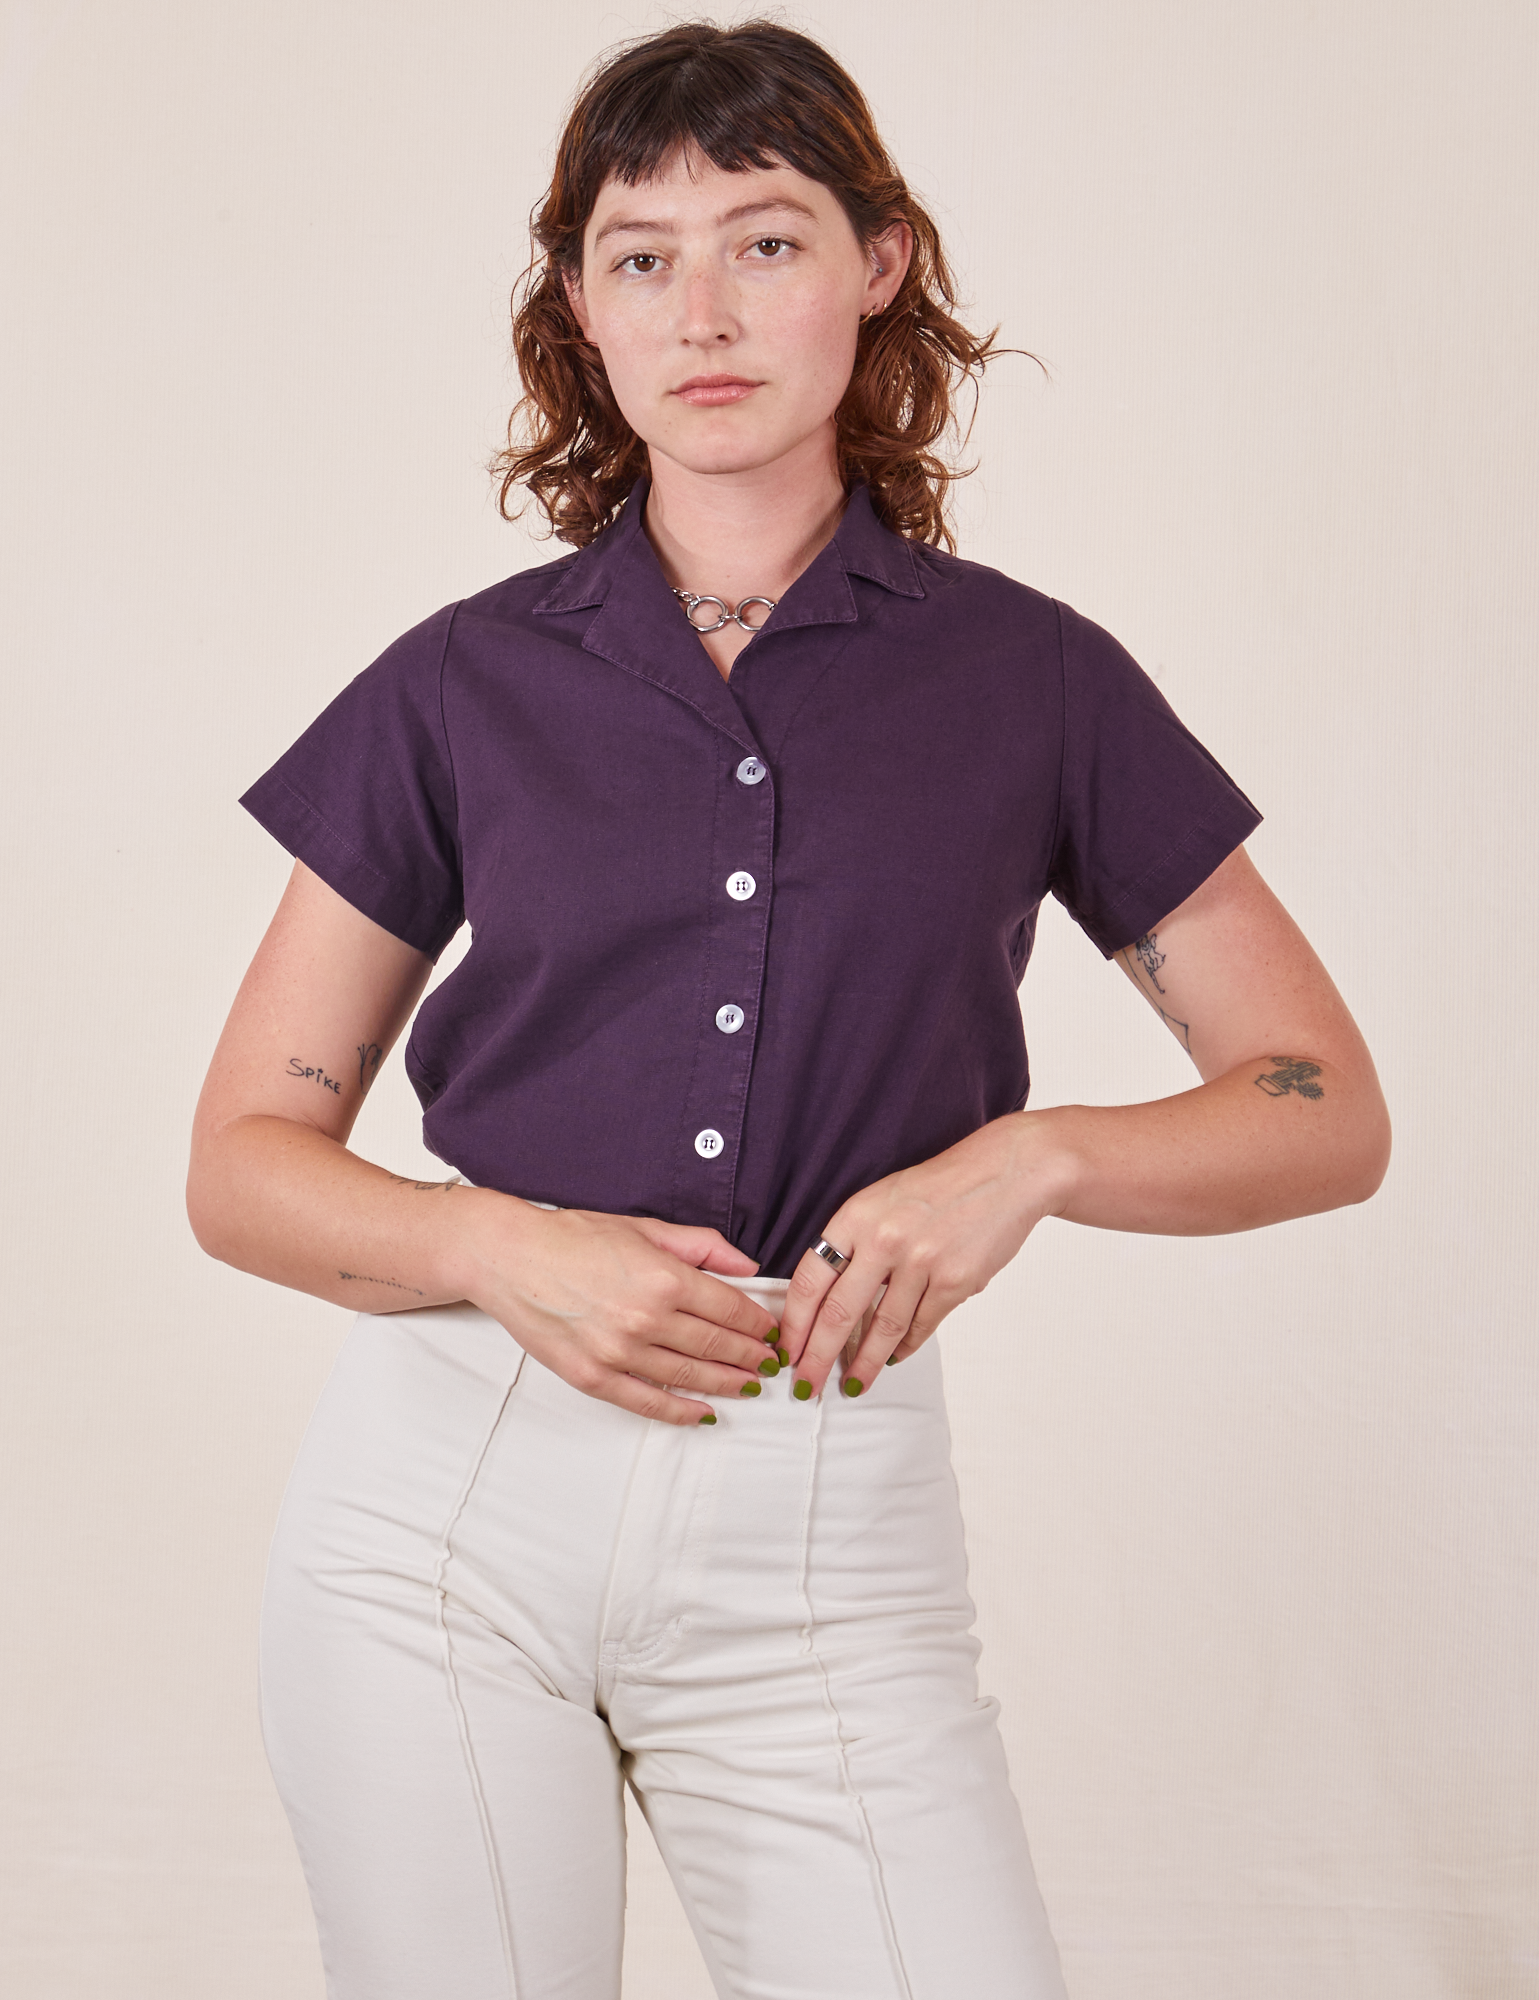 Alex is wearing P Pantry Button-Up in Nebula Purple tucked into vintage tee off-white Western Pants